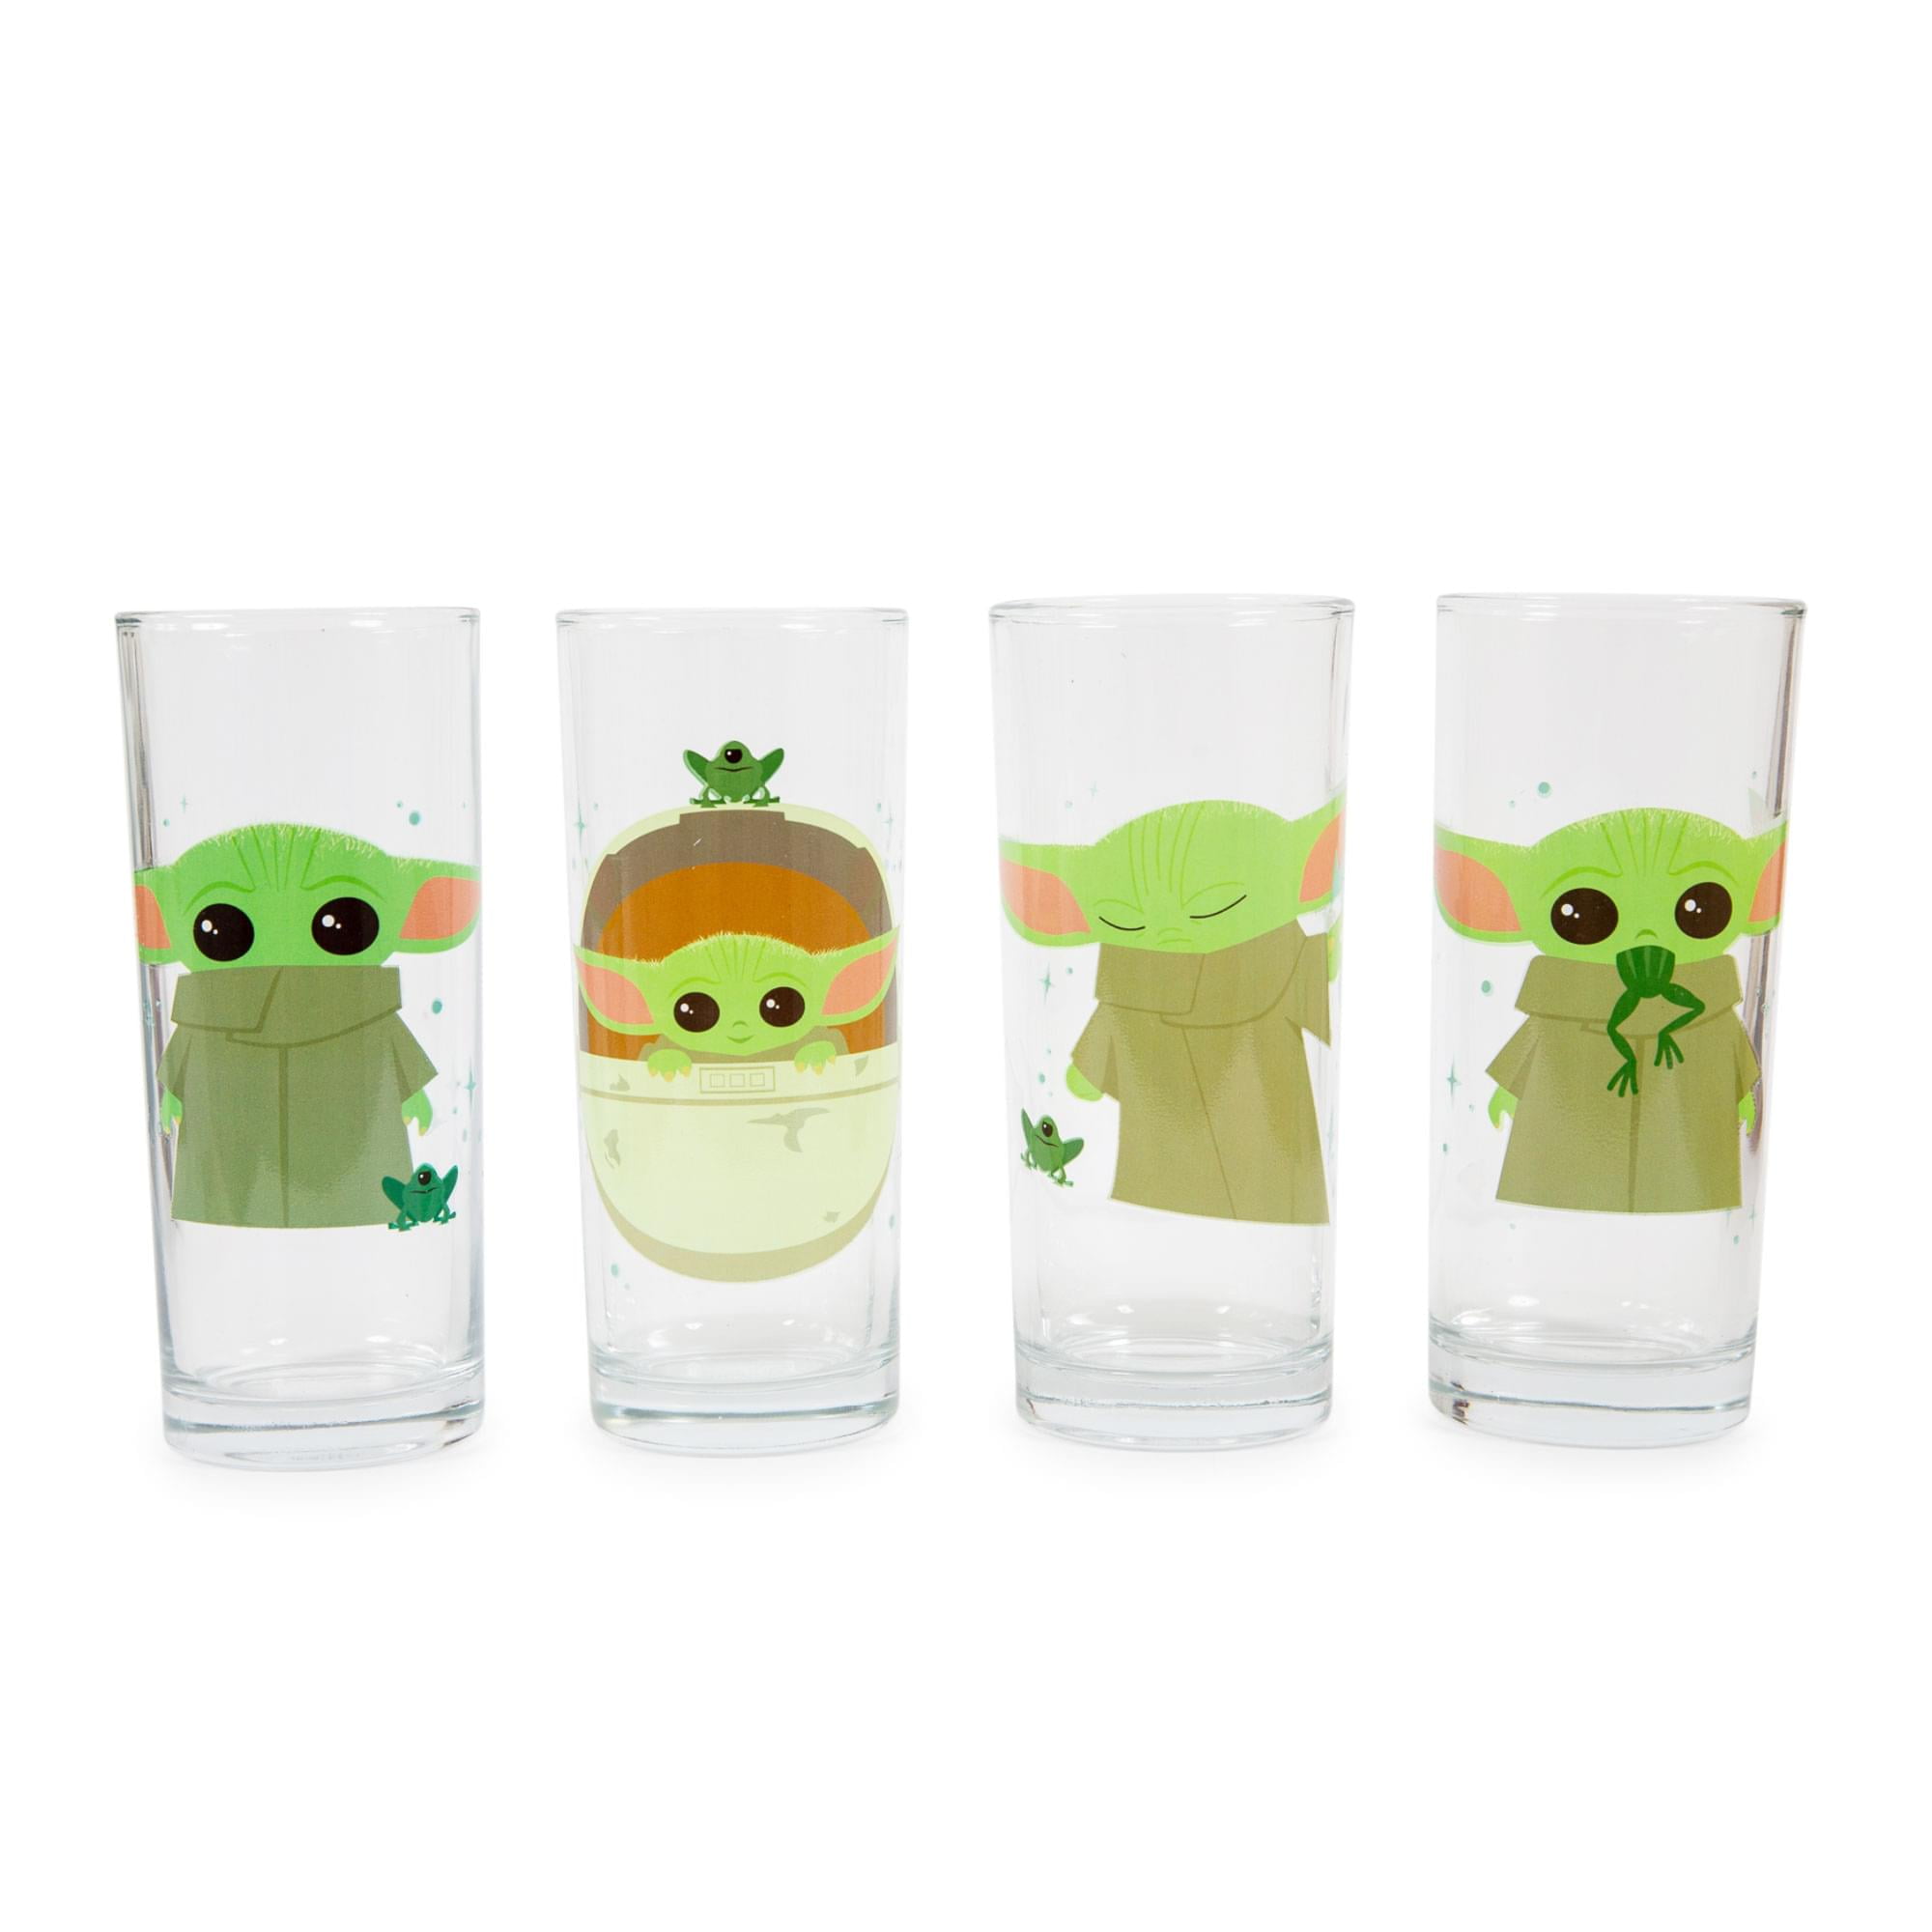 Star Wars Yoda May The Force Be With You Ceramic Shot Glass